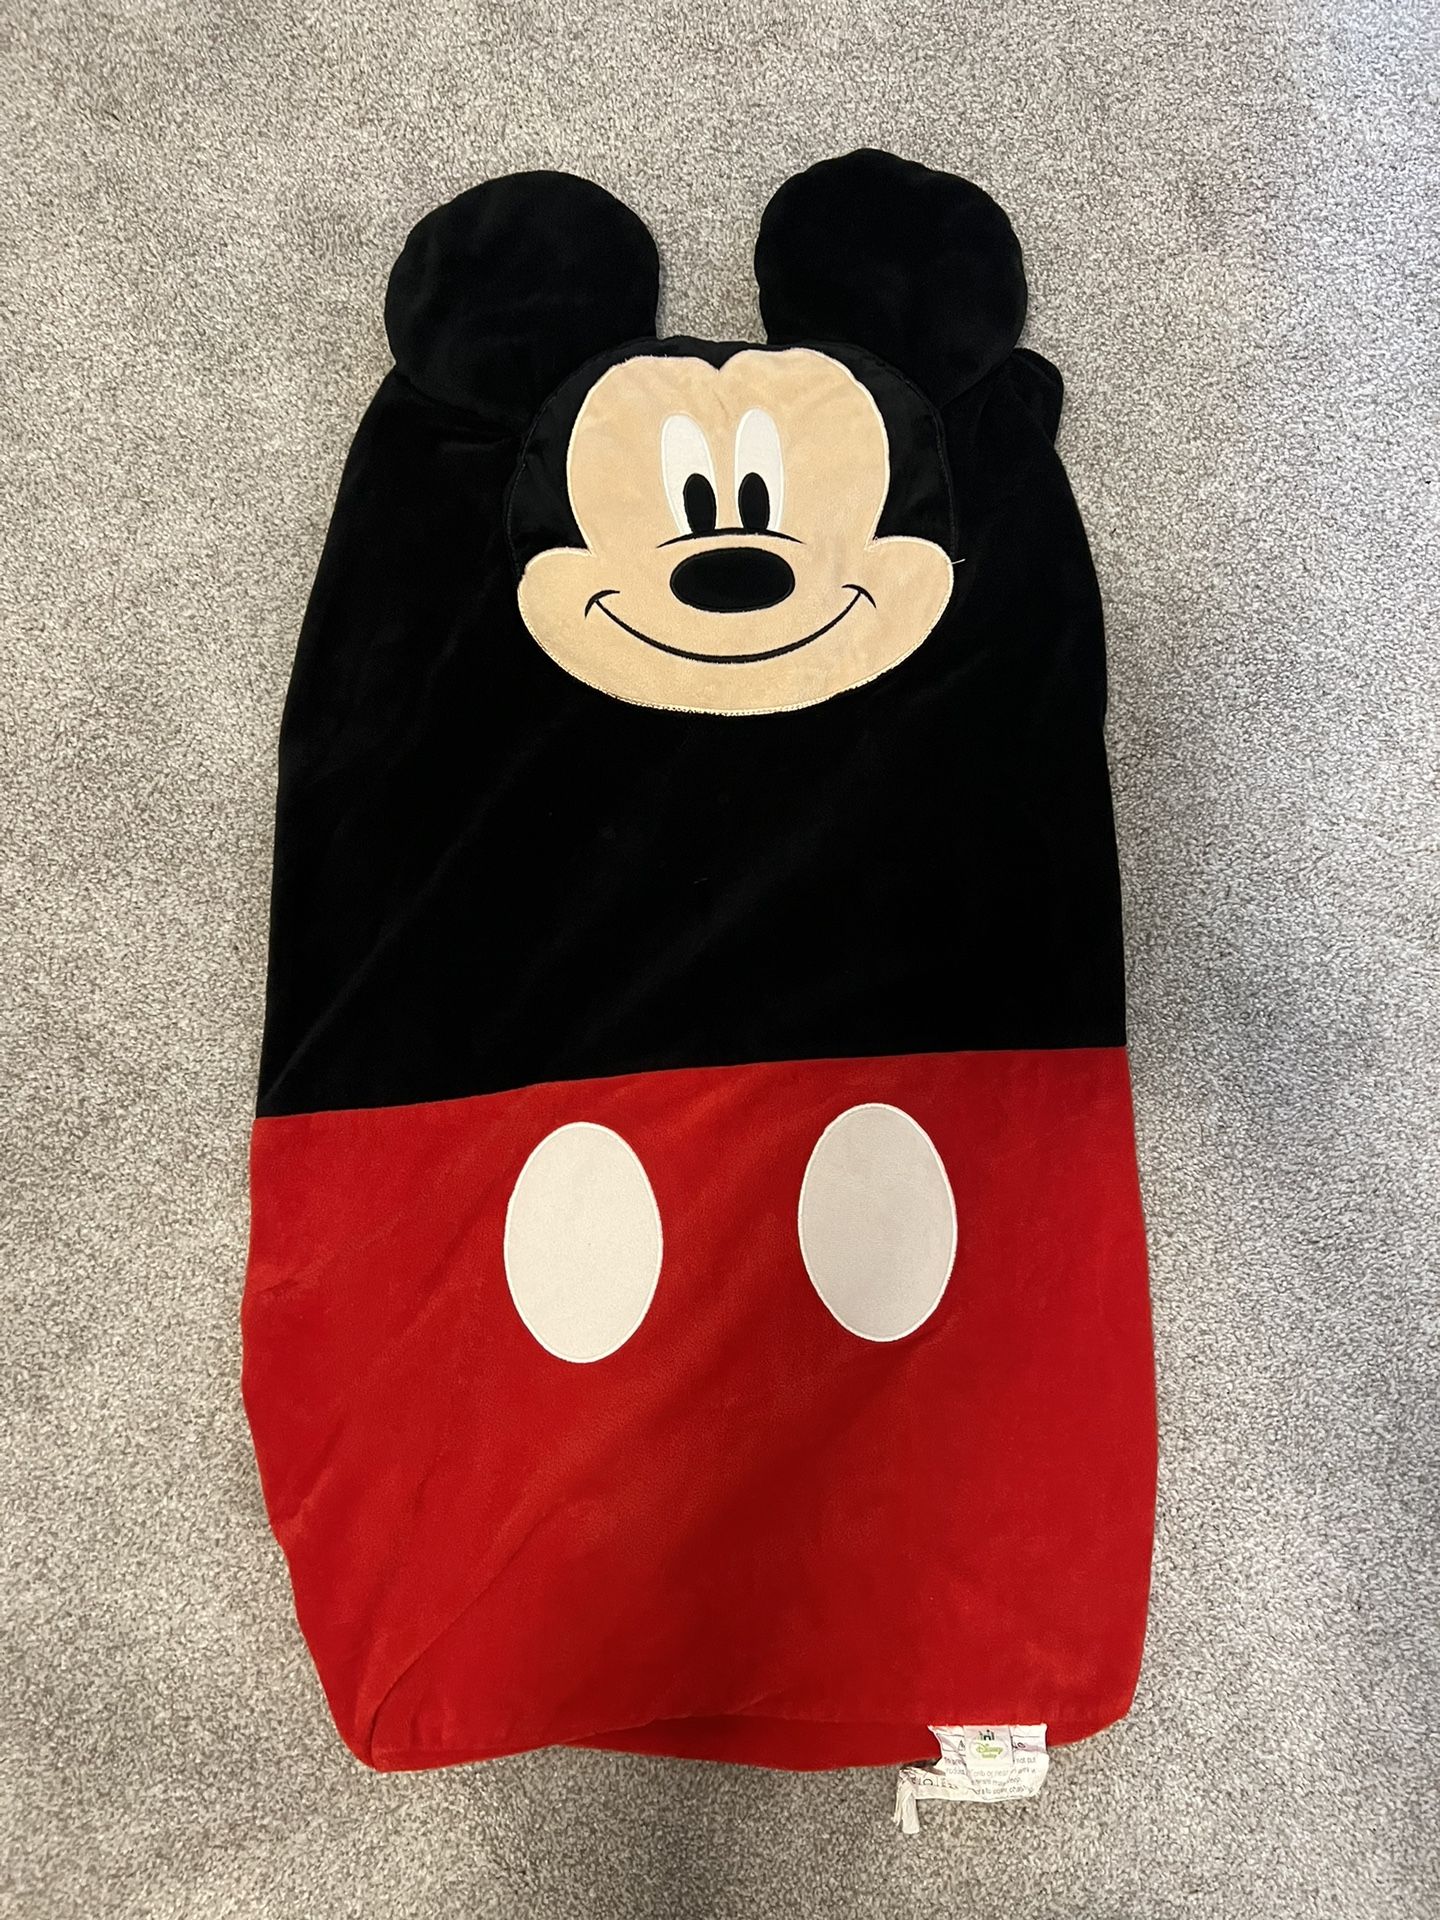 Baby Mickey Mouse Changing Table Cover